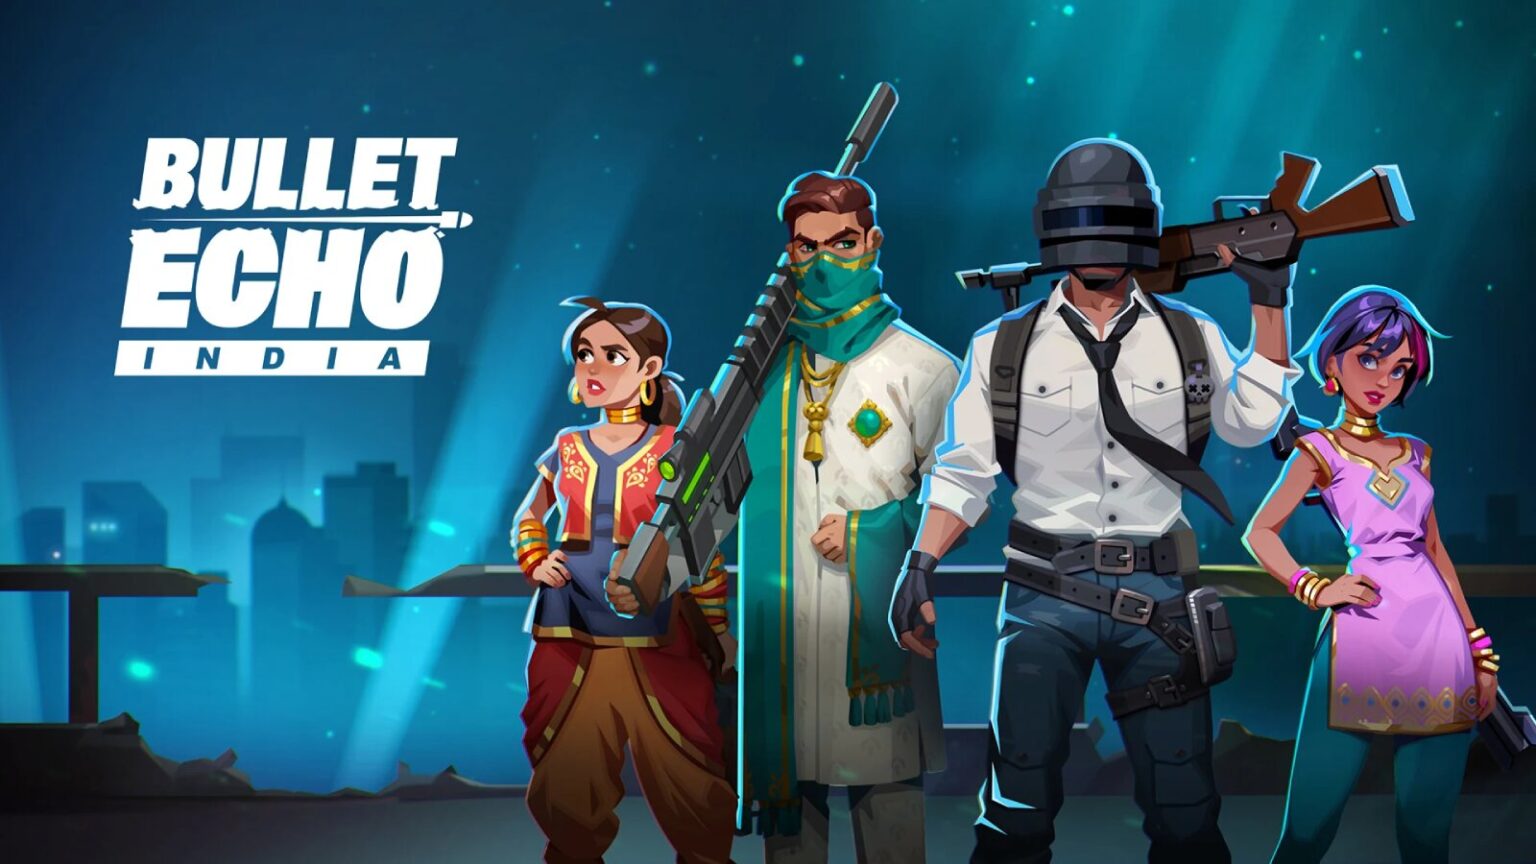 Bullet Echo India game displays characters in vibrant cultural attire